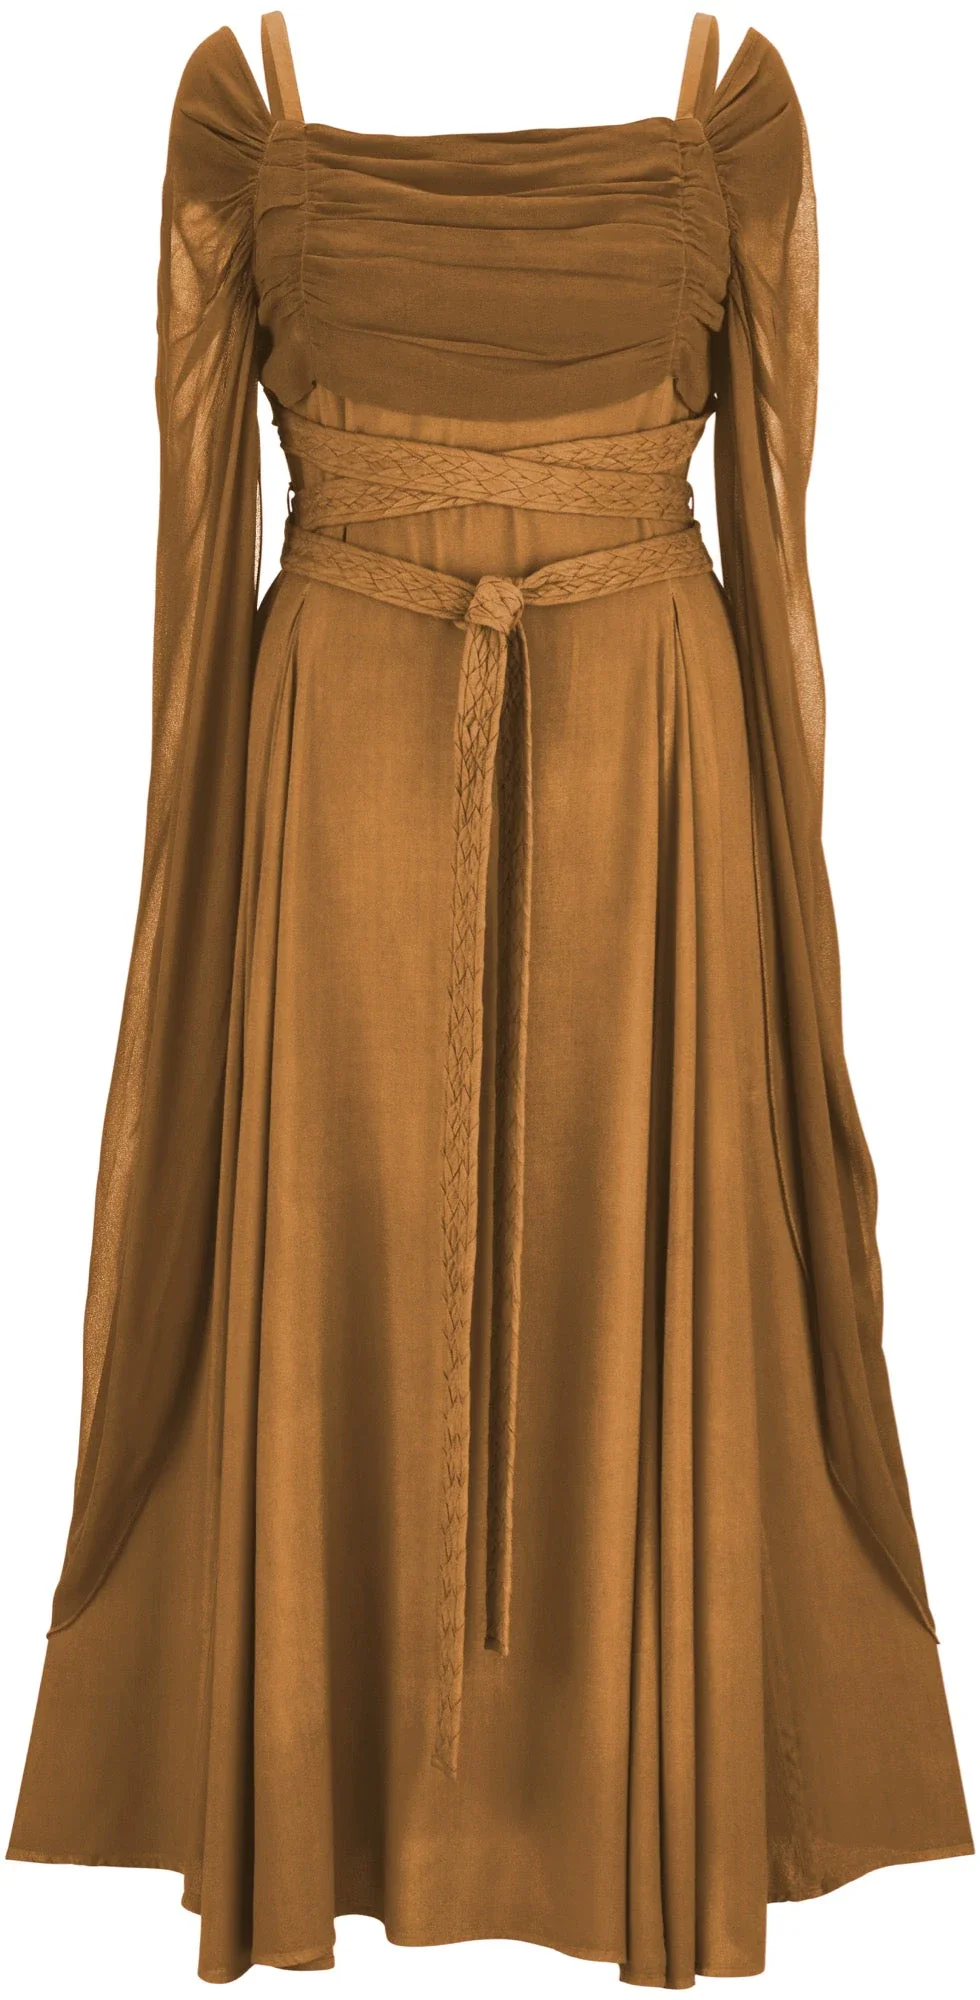 Image of Demeter Maxi Limited Edition Marigold Yellow